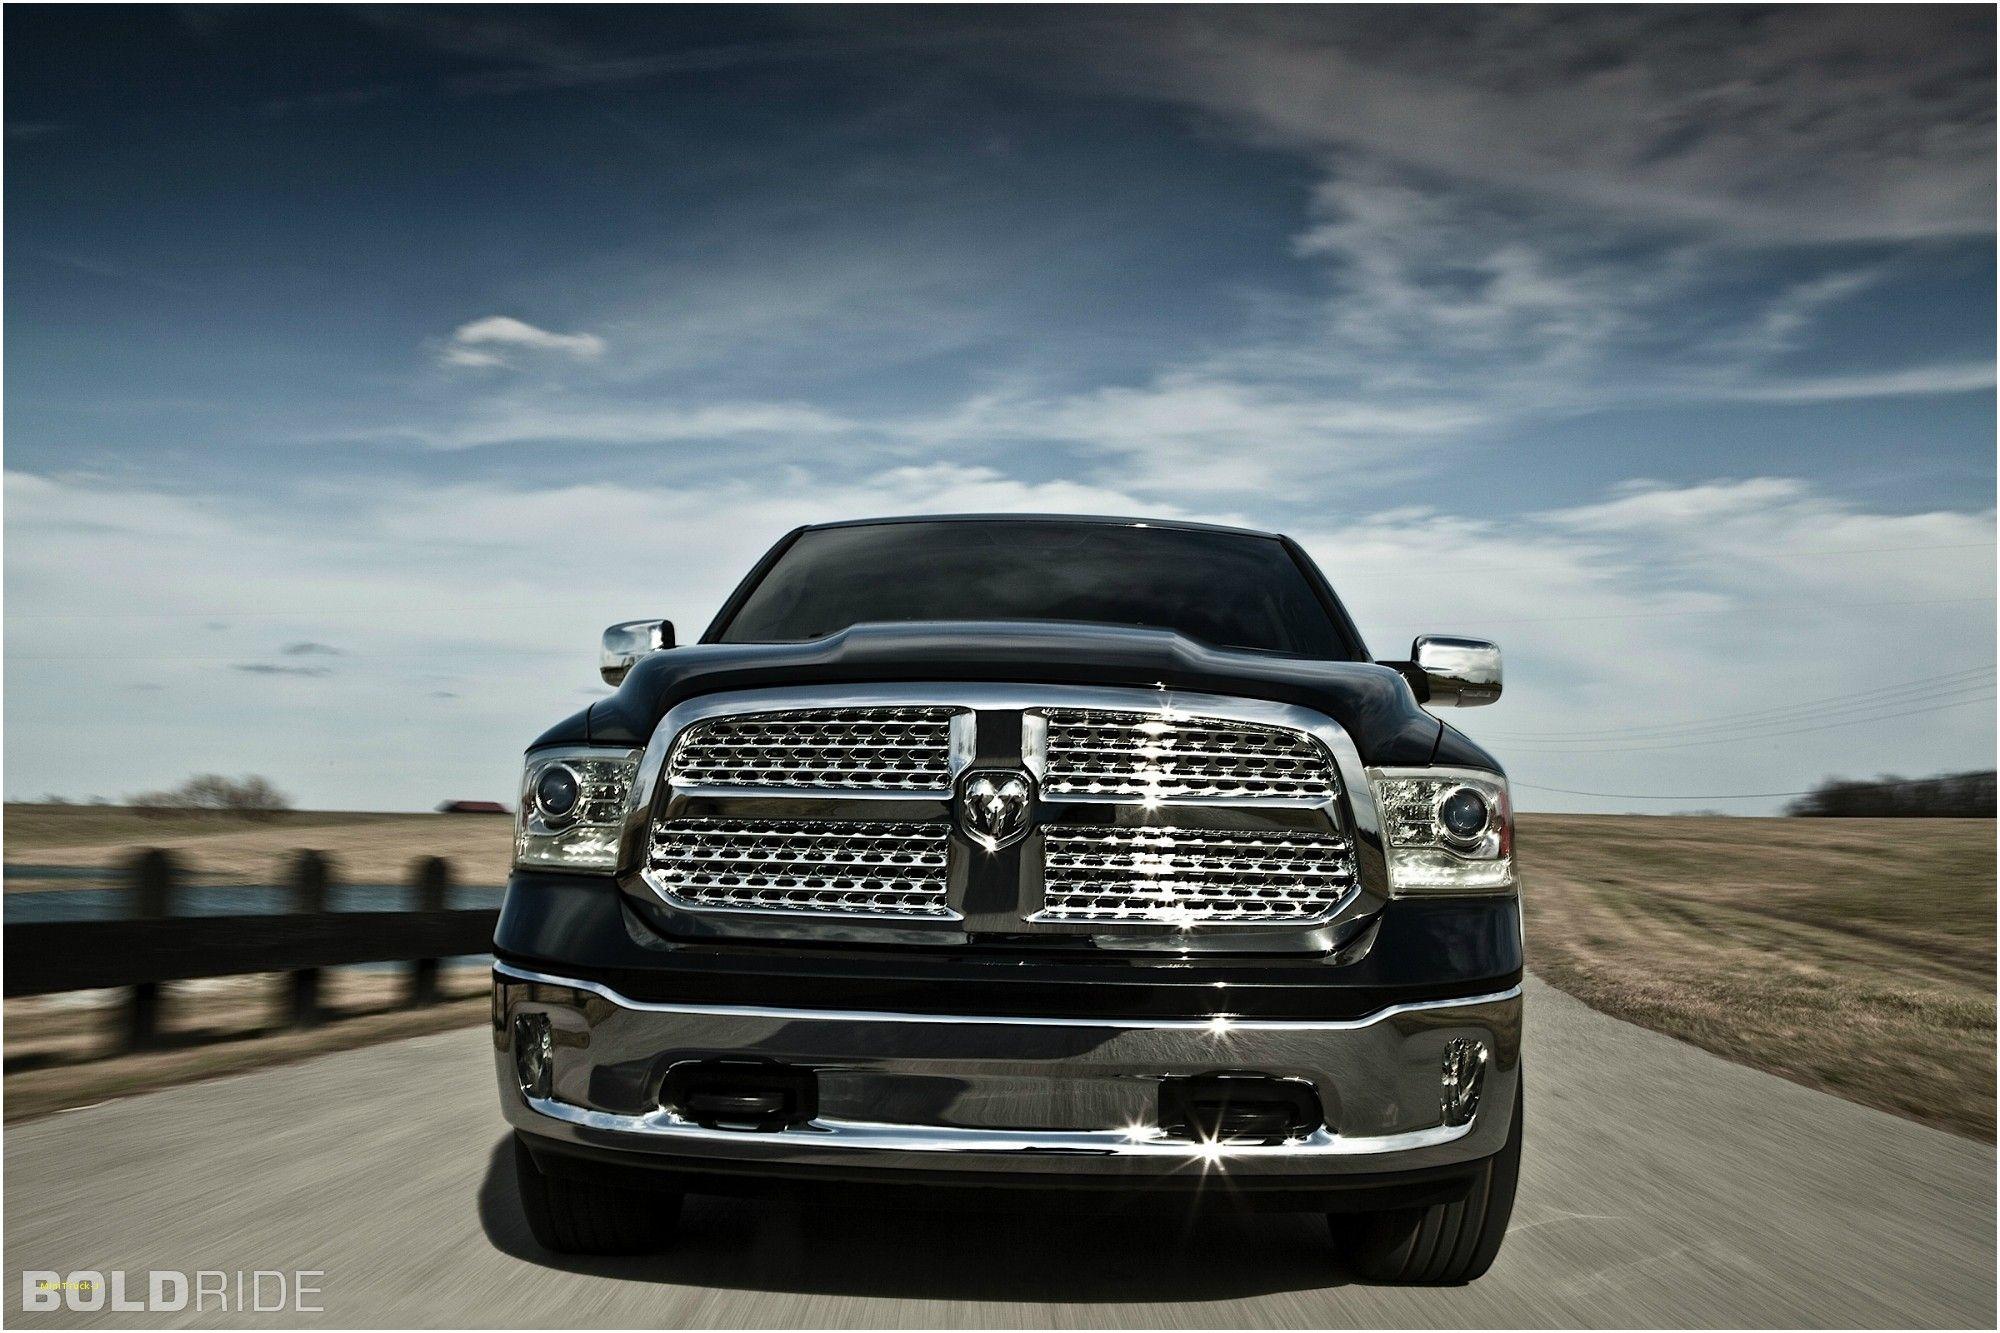 Awesome Ram Trucks Wallpaper today